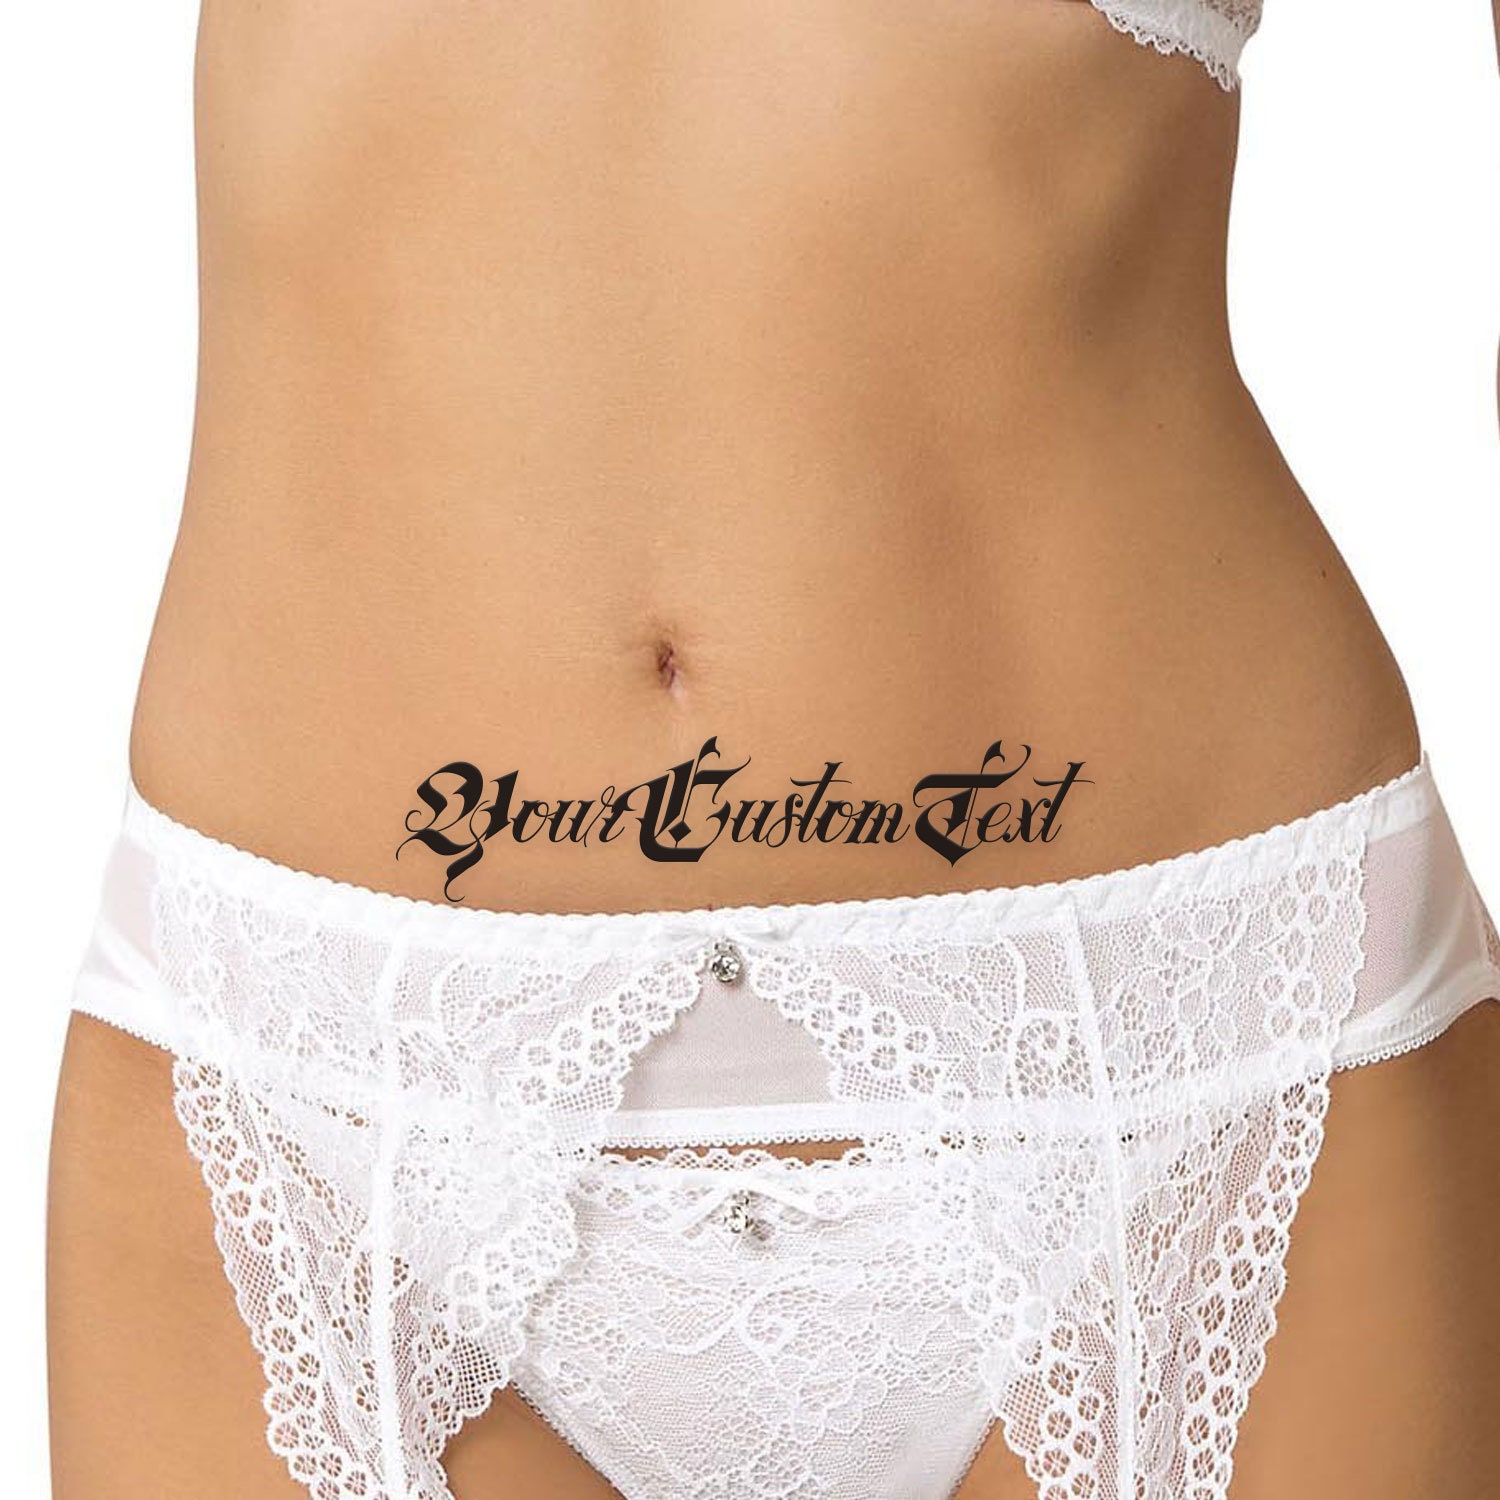 Custompersonalised Adult Temporary Tattoos Tramp Stamps Etsy 